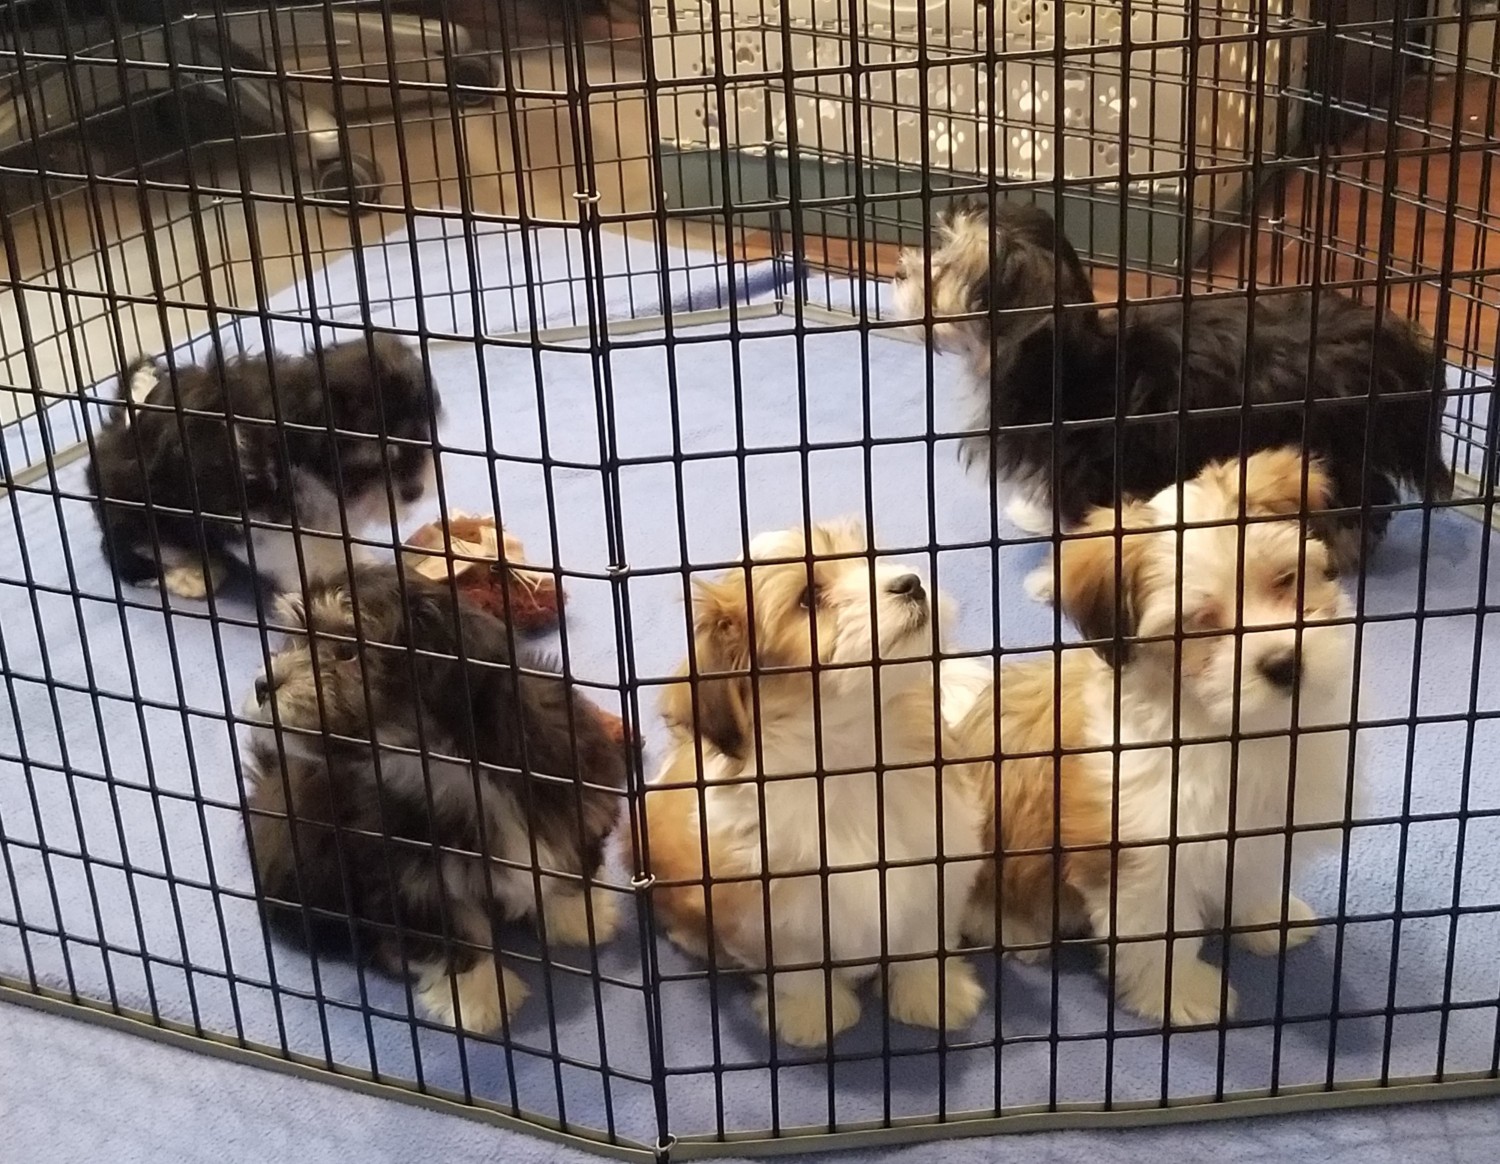 Lots of puppies in a pen